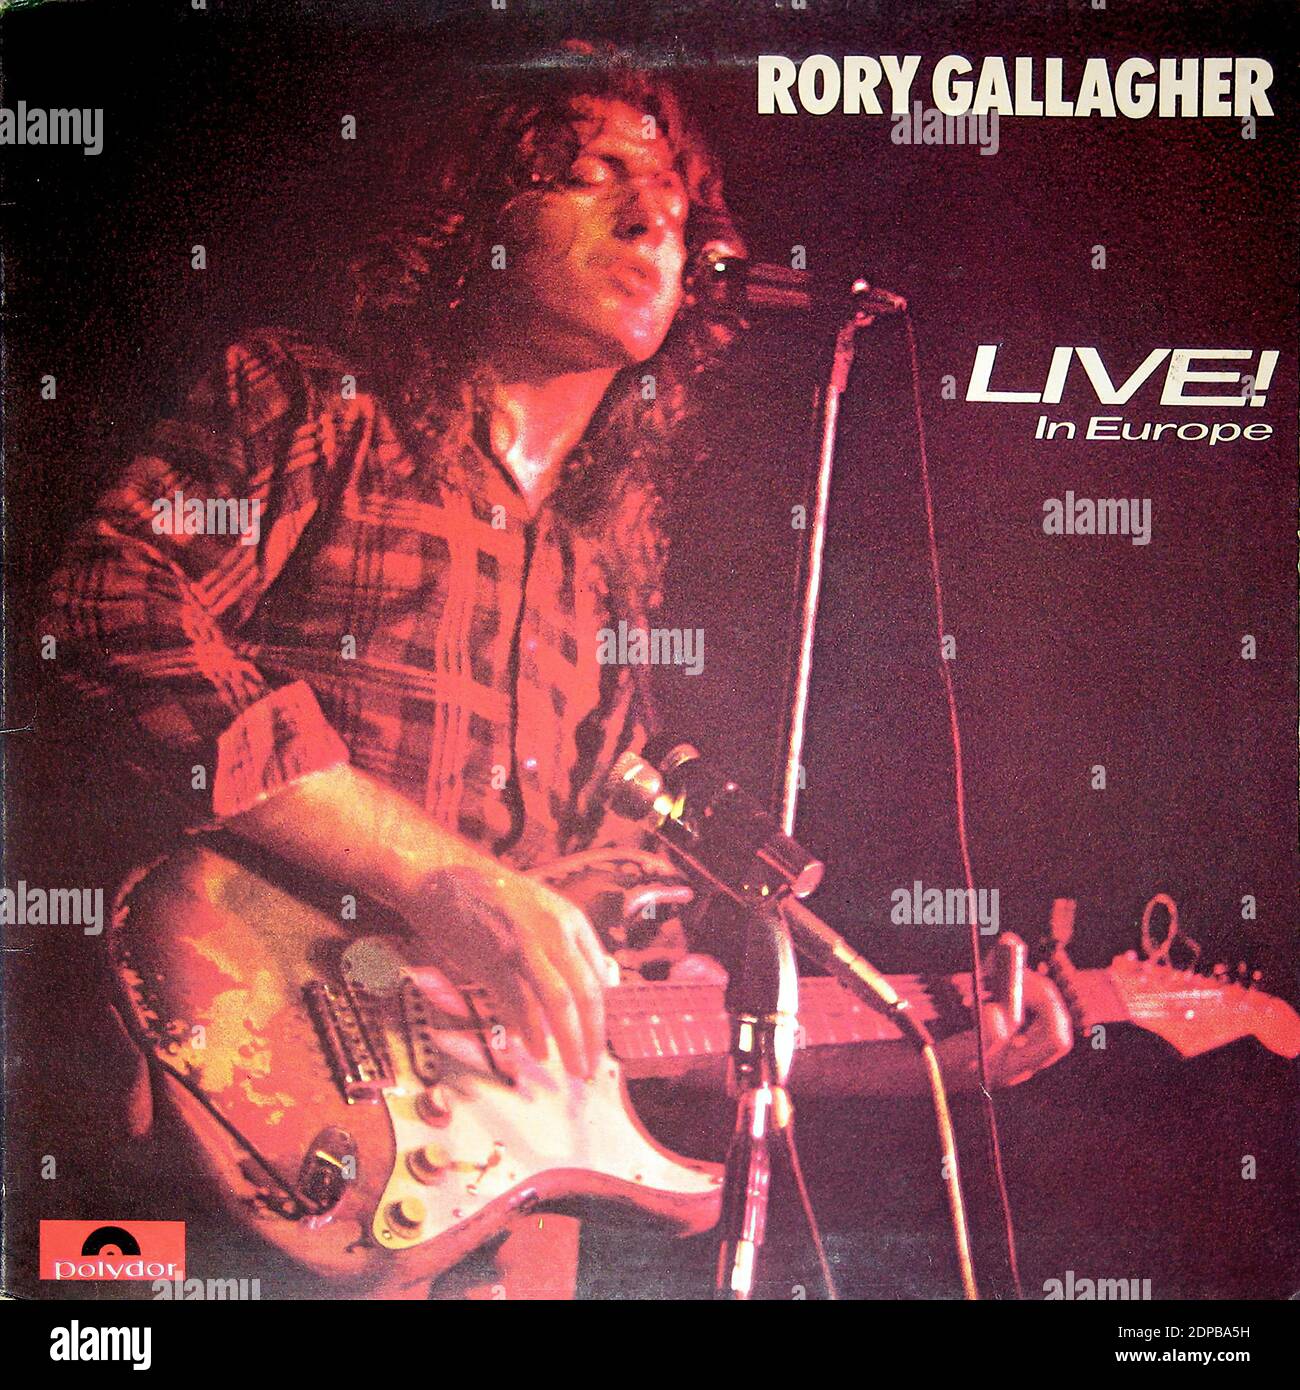 Rory Gallagher   Live in Europe (Gatefold)  - Vintage Vinyl Record Cover02 Stock Photo